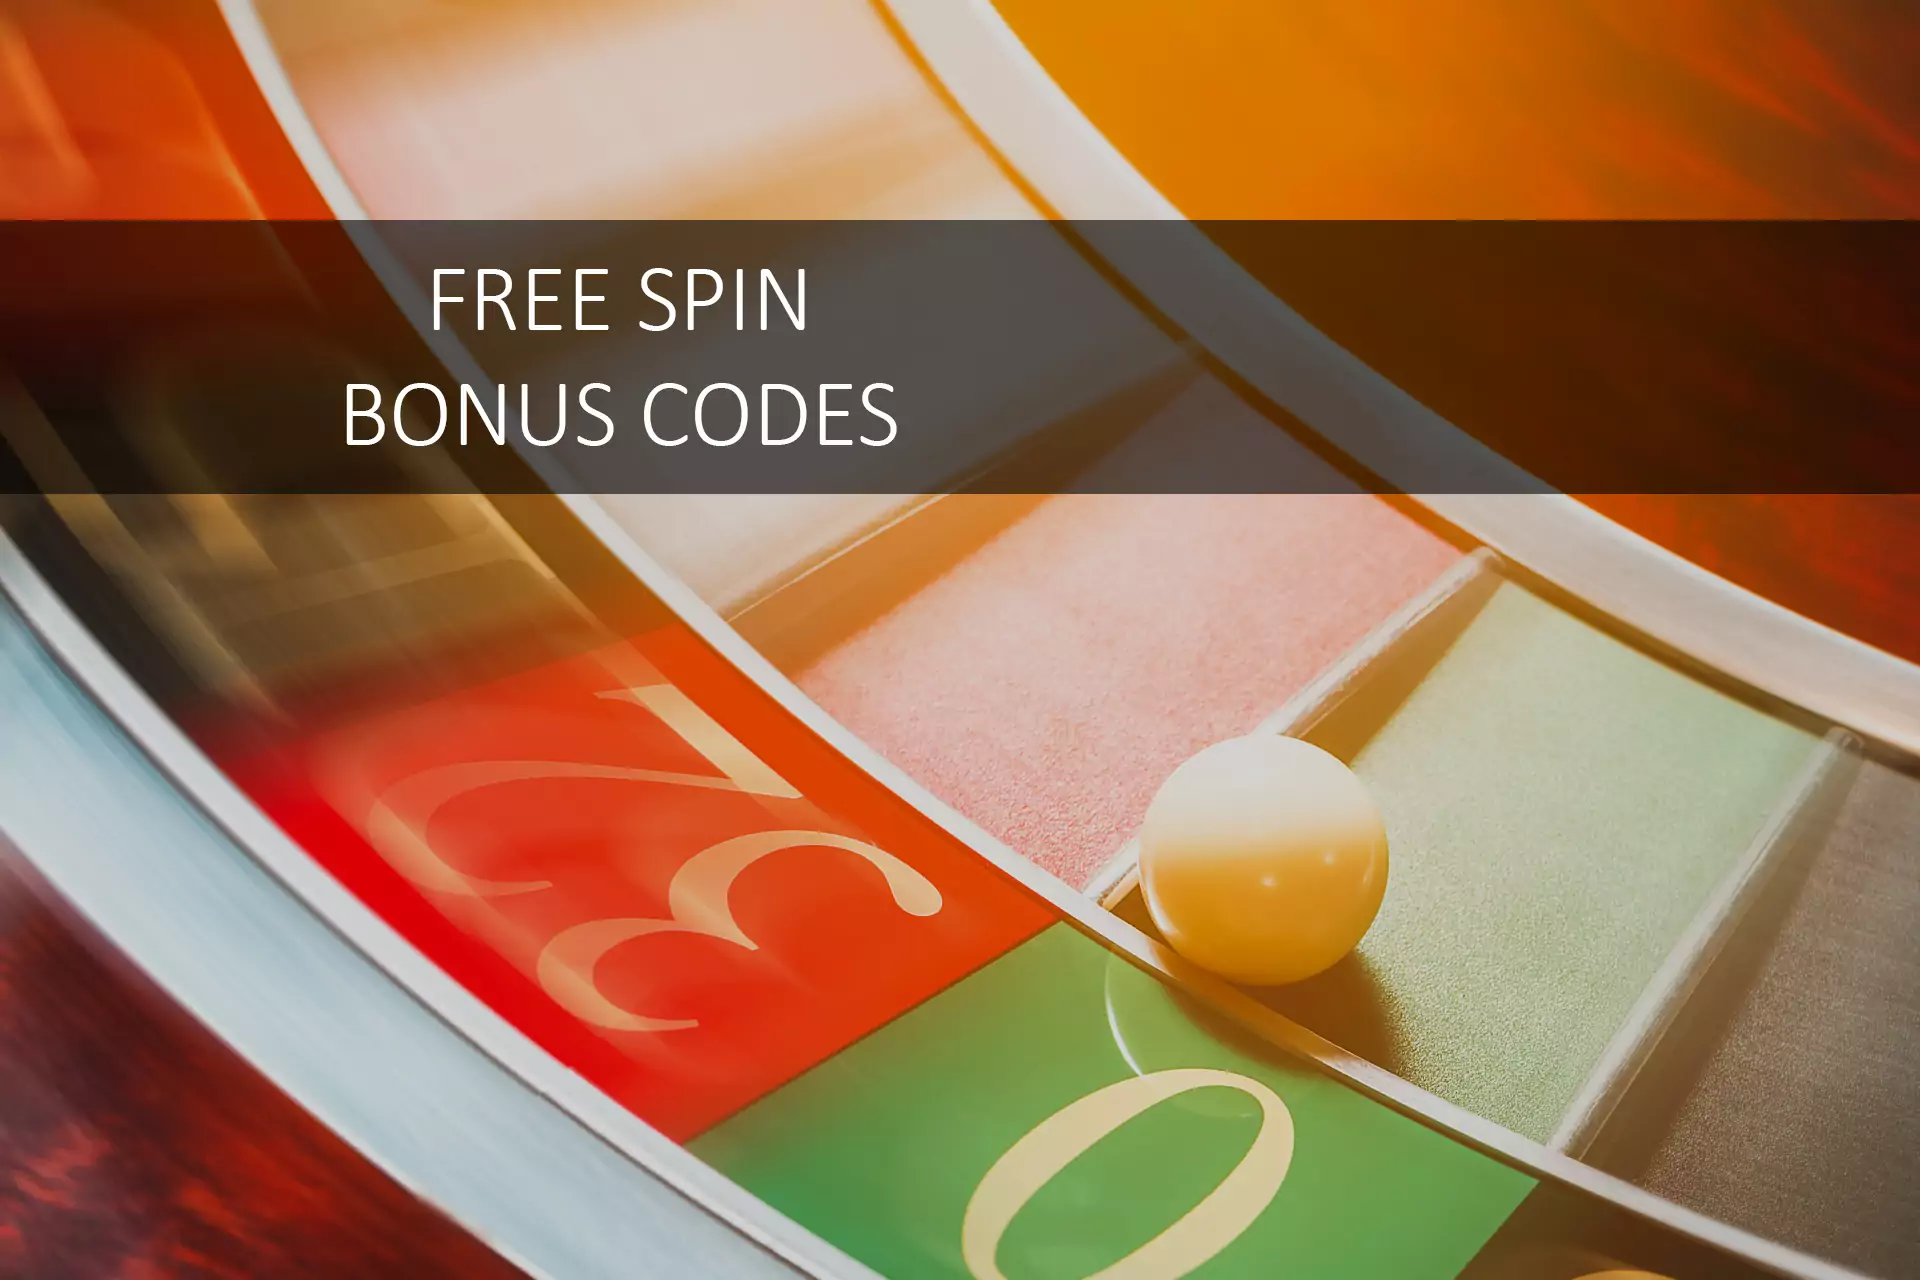 The free spin bonus is a random lottery on the betting site.